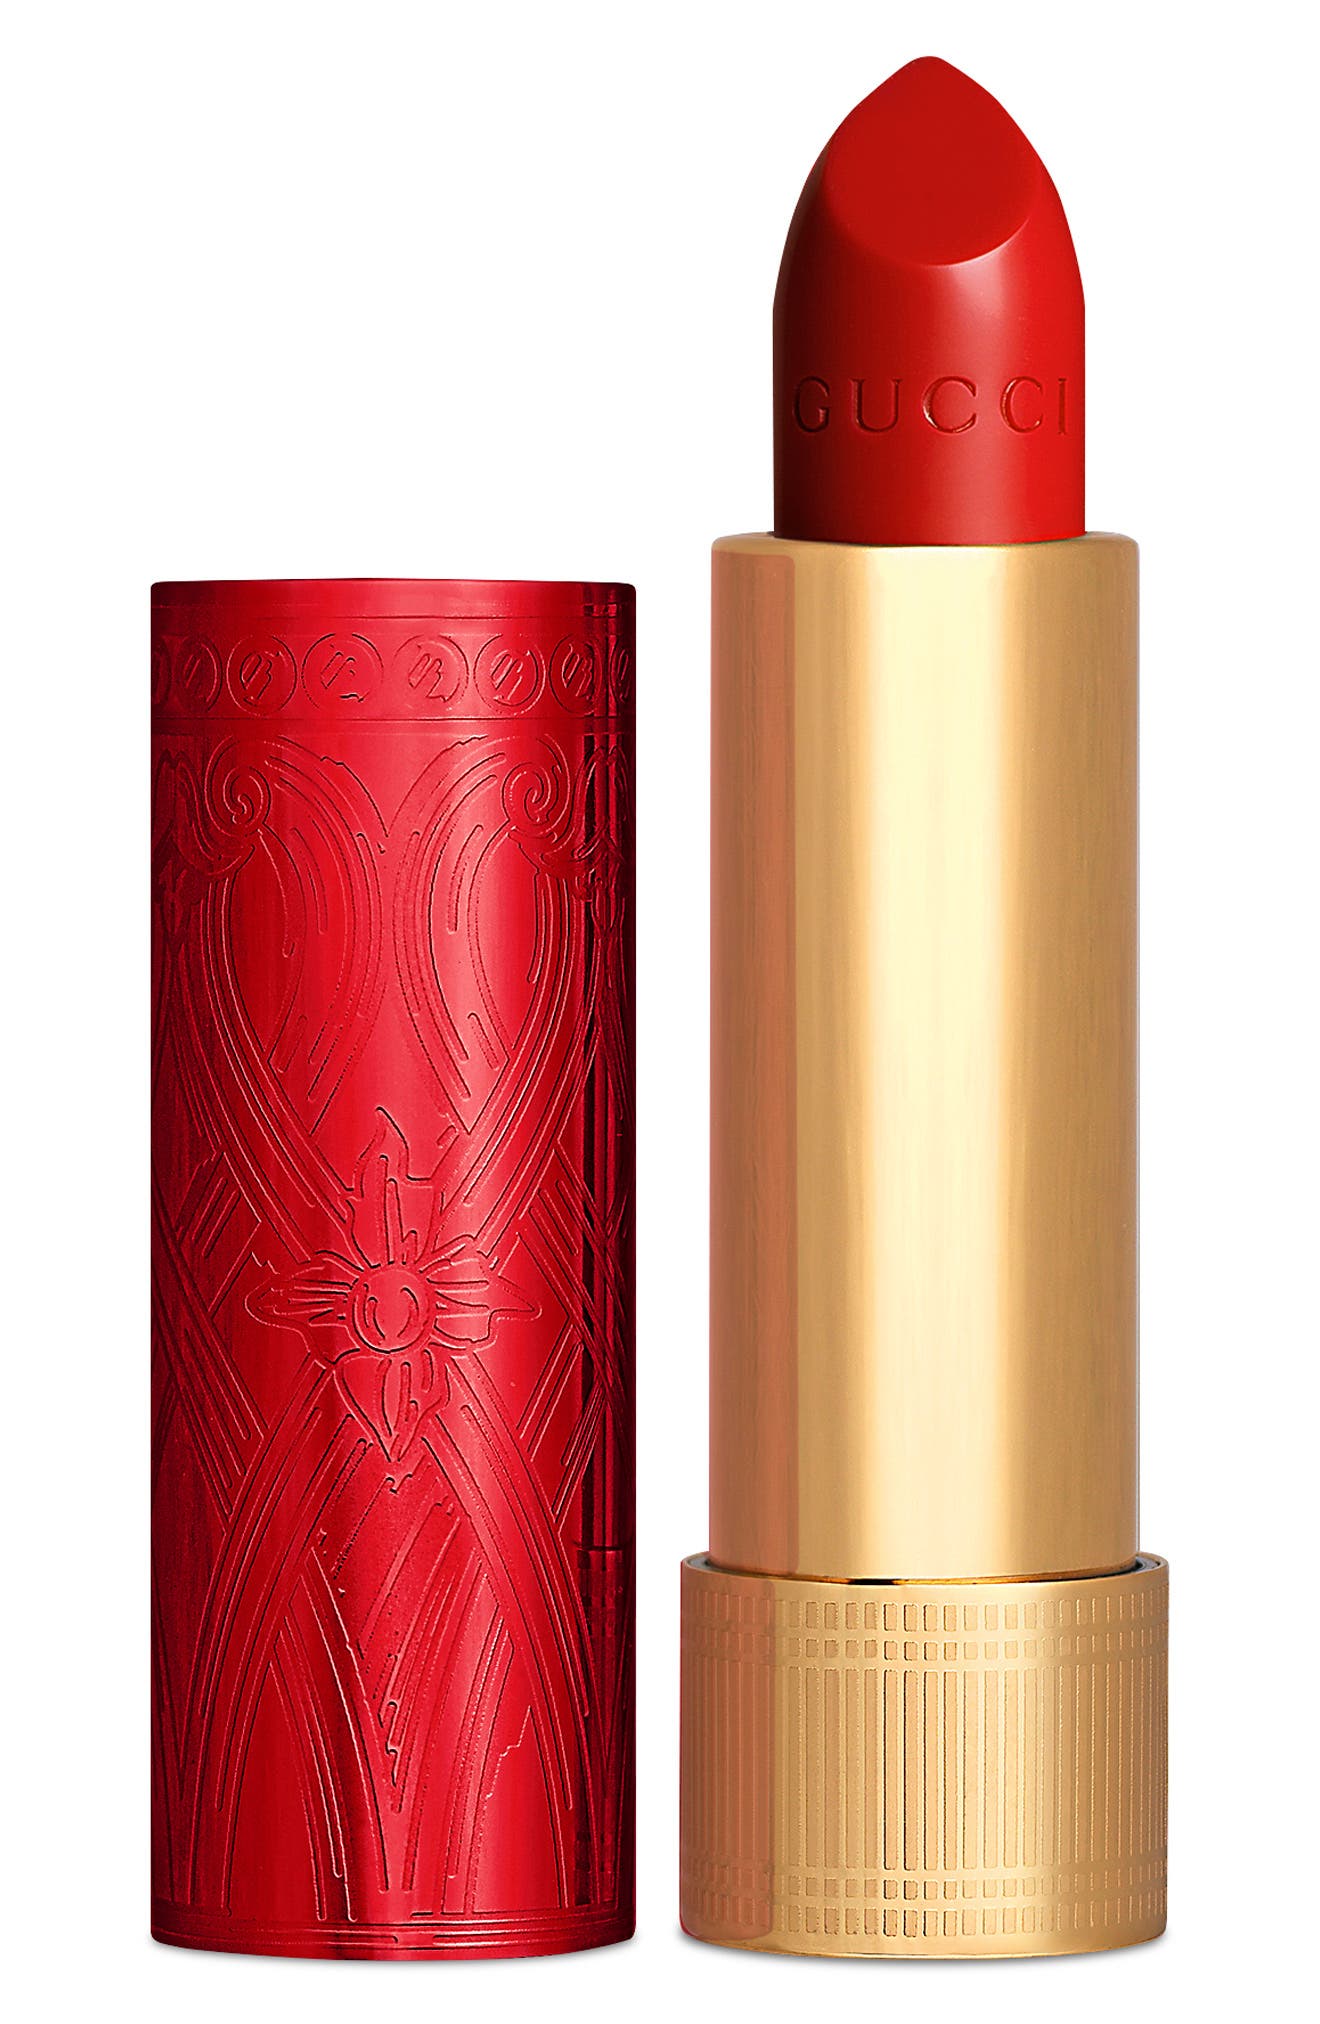 Gucci Lunar New Year Rouge a Levres Satin Lipstick in 513 Emmy Red at Nordstrom